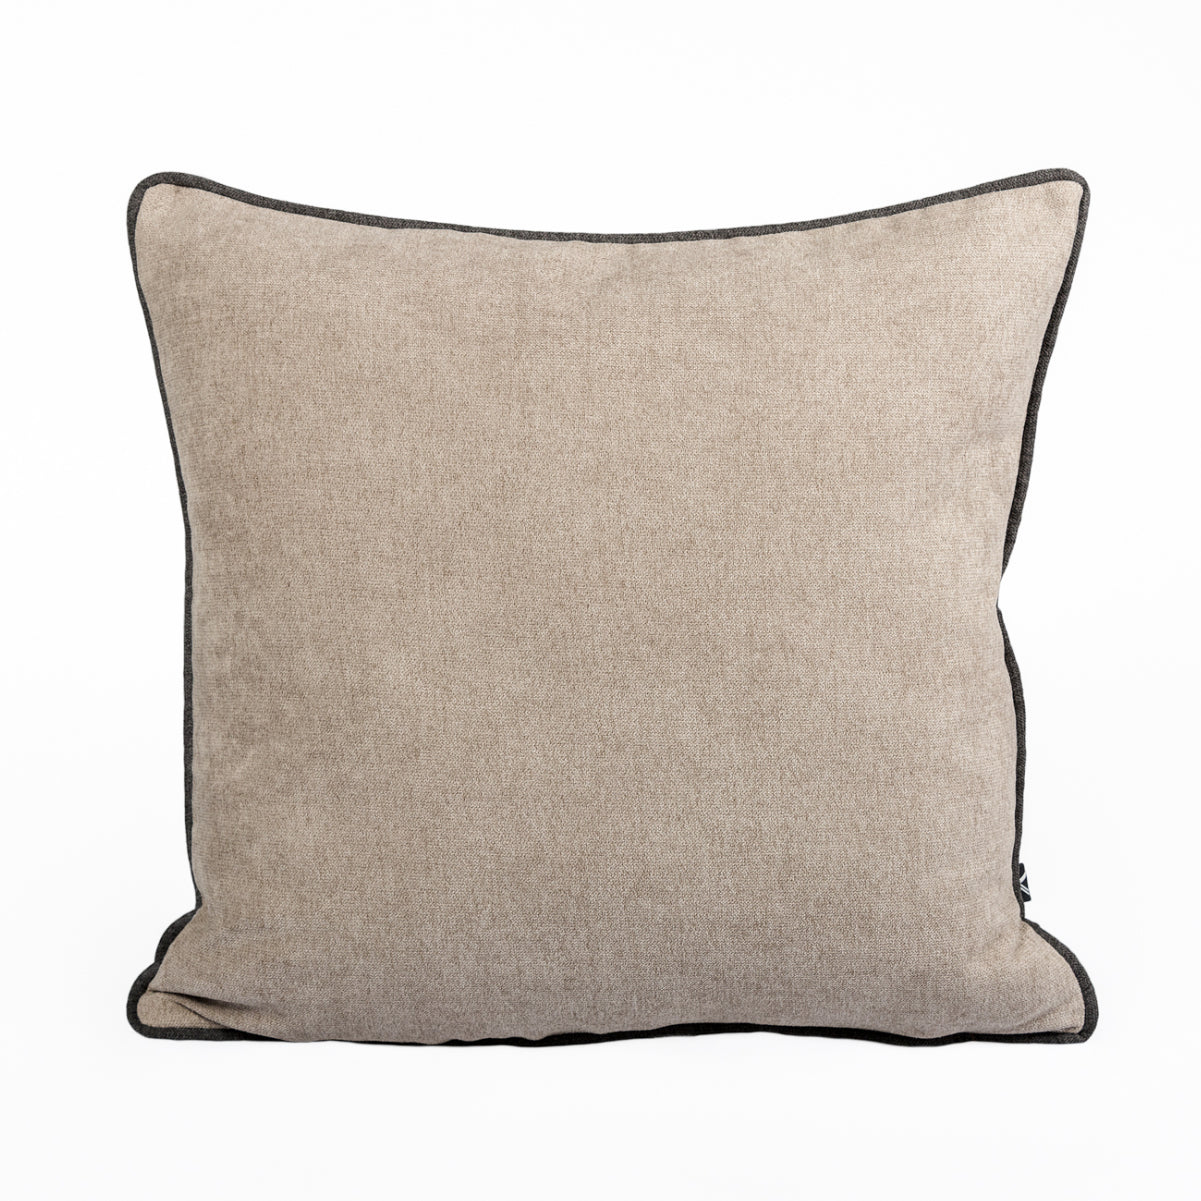 Cushion BELLUS 45x45 Velvet Beige Taupe with Black Cord